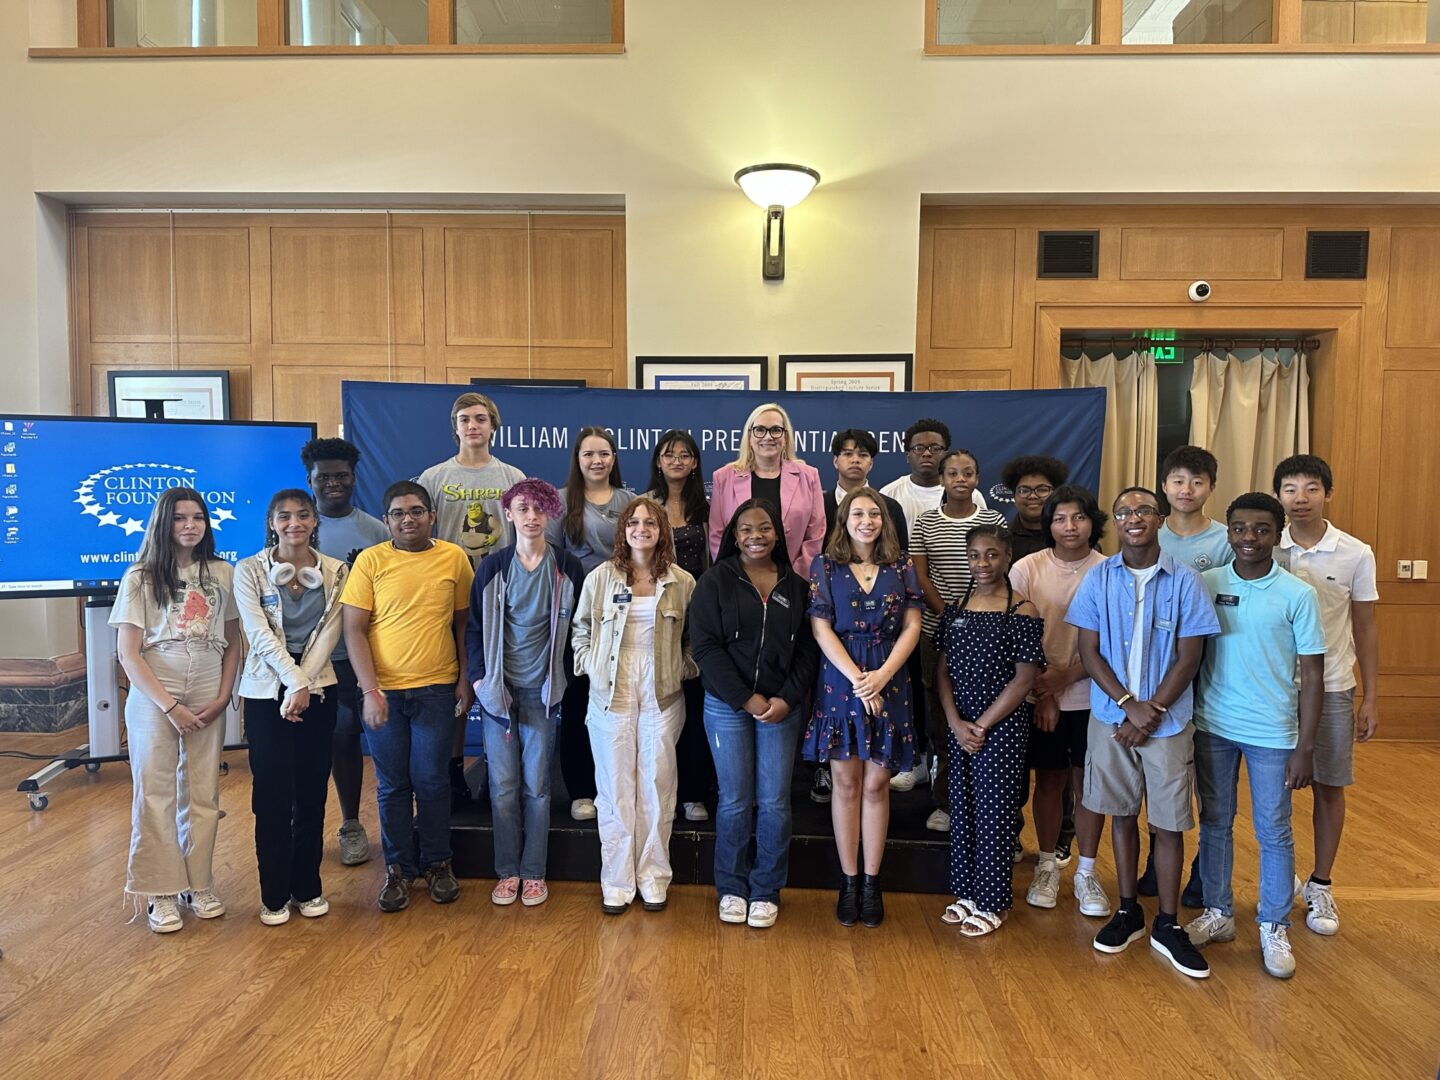 Executive Director, Stephanie Streett and a group of high school students gathered for a photo after an event in Sturgis Hall